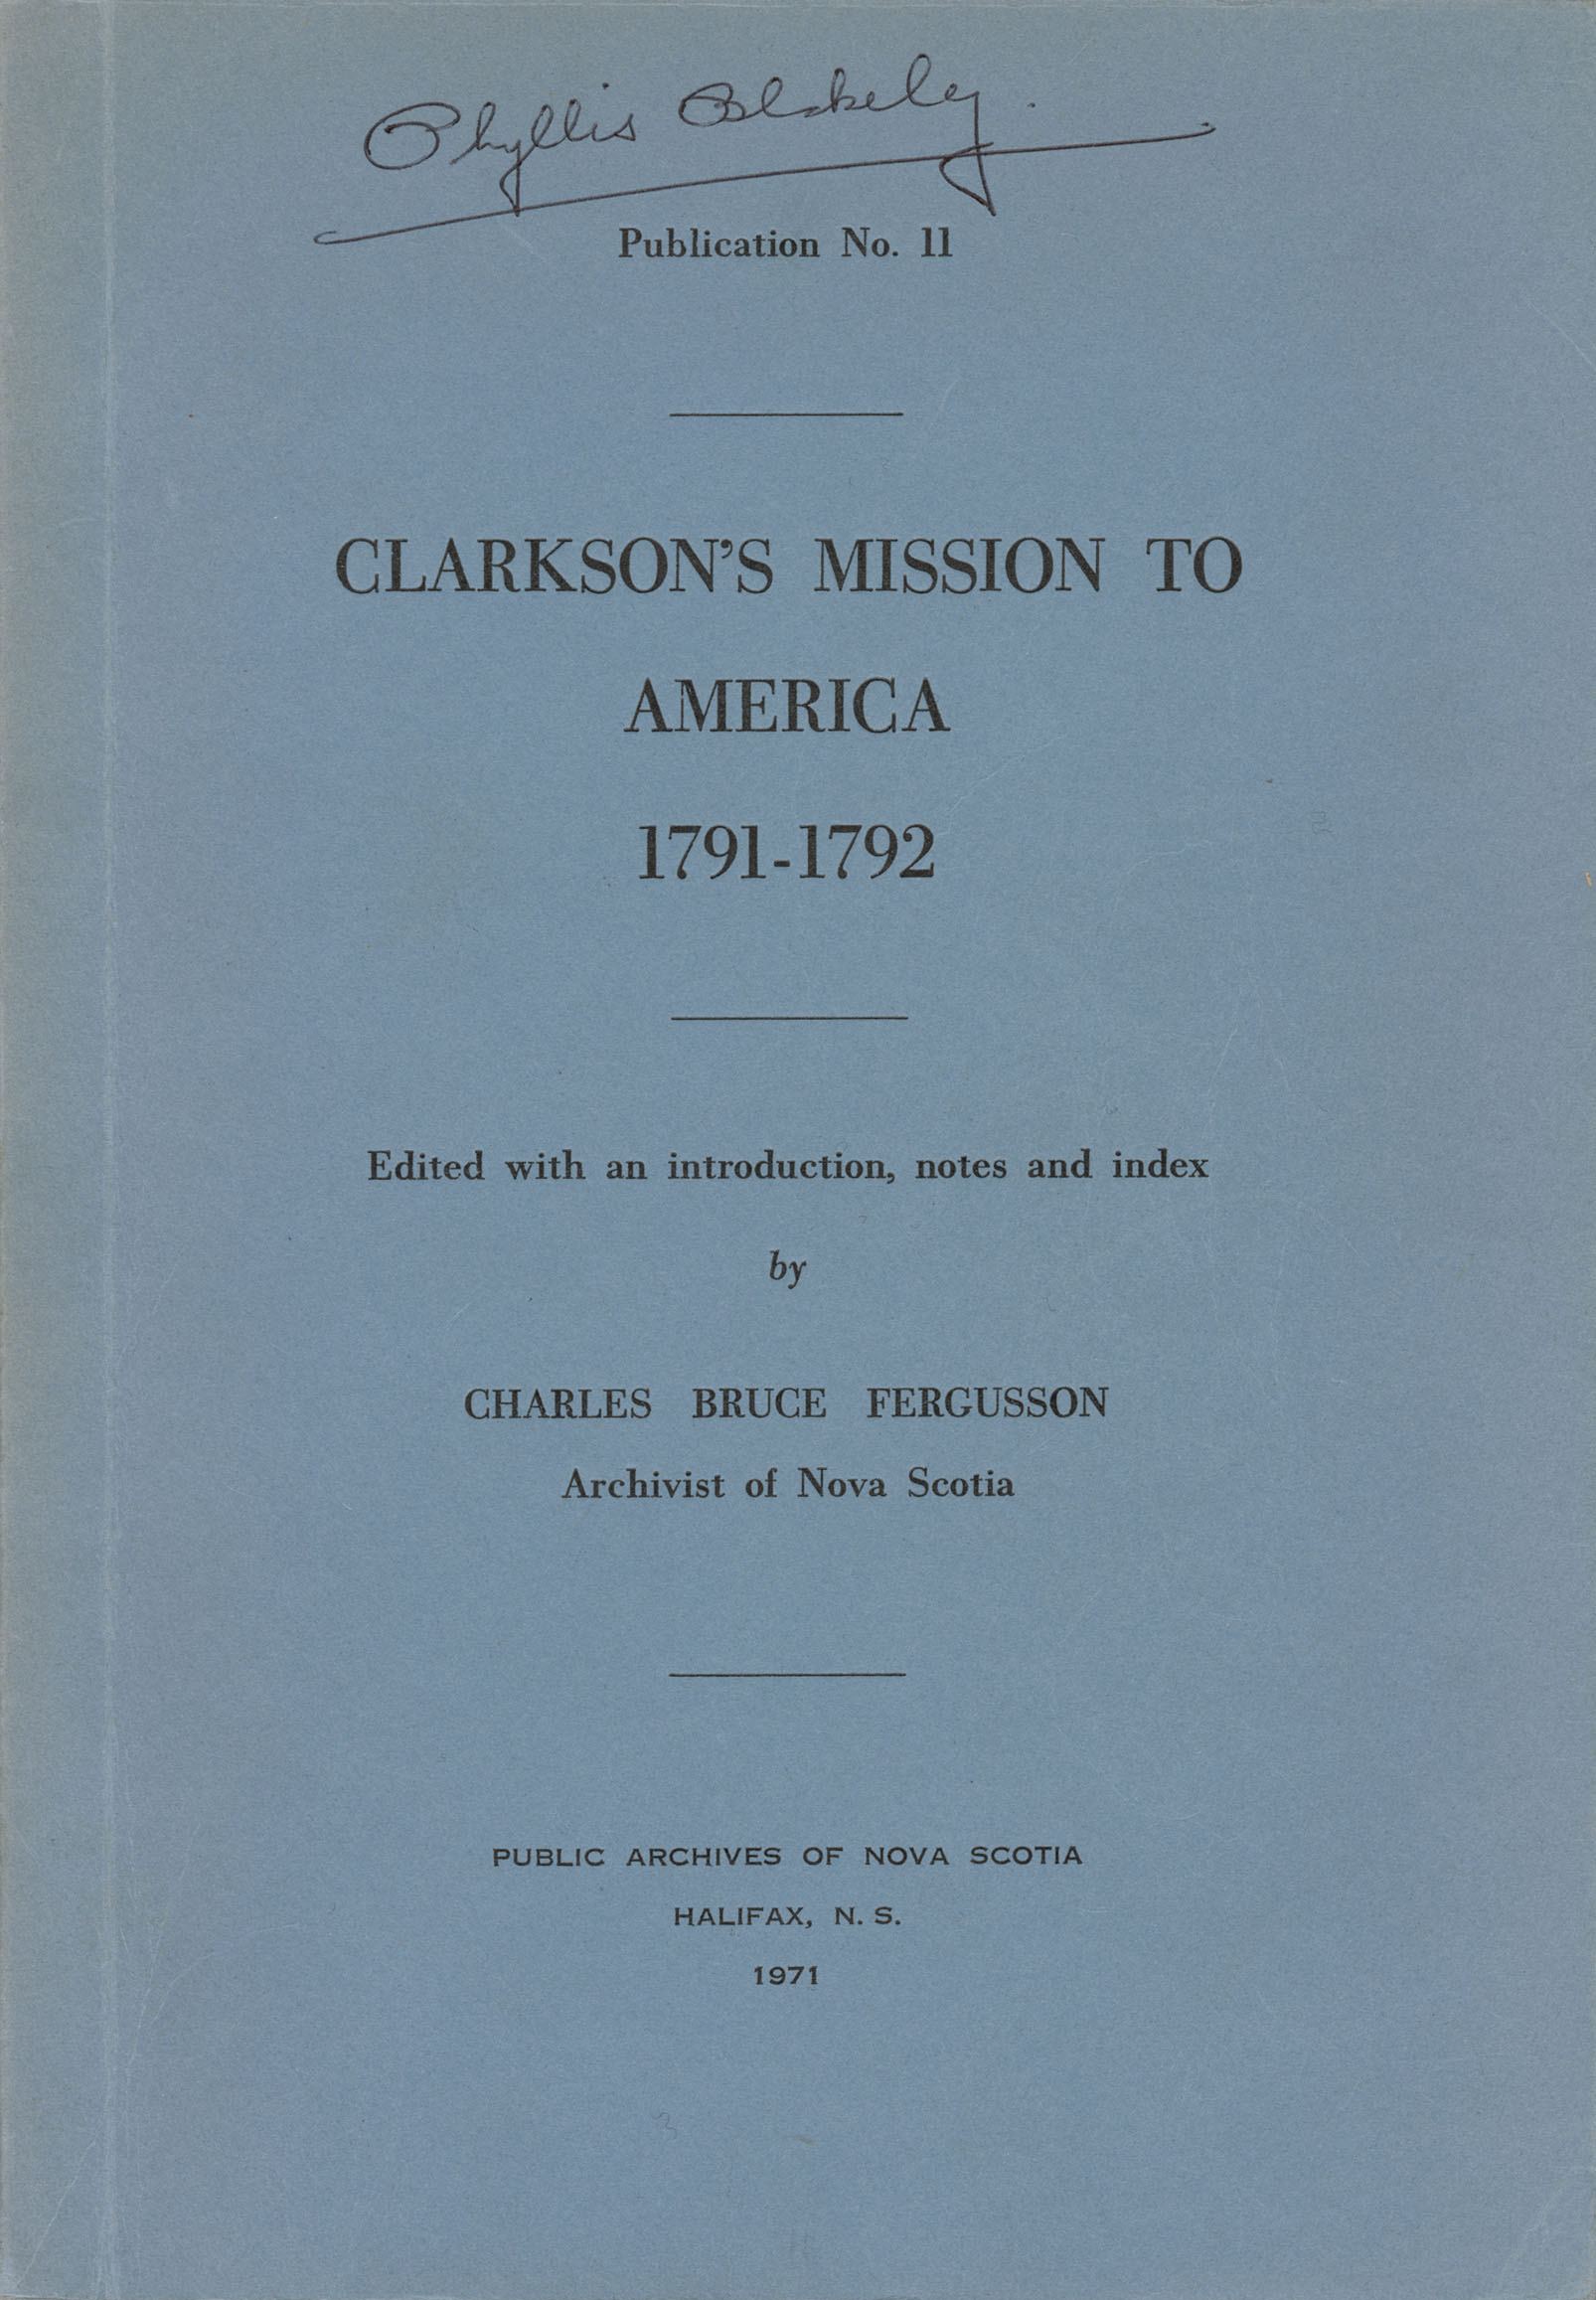 african-heritage : Clarksons Mission to America, 1791-1792